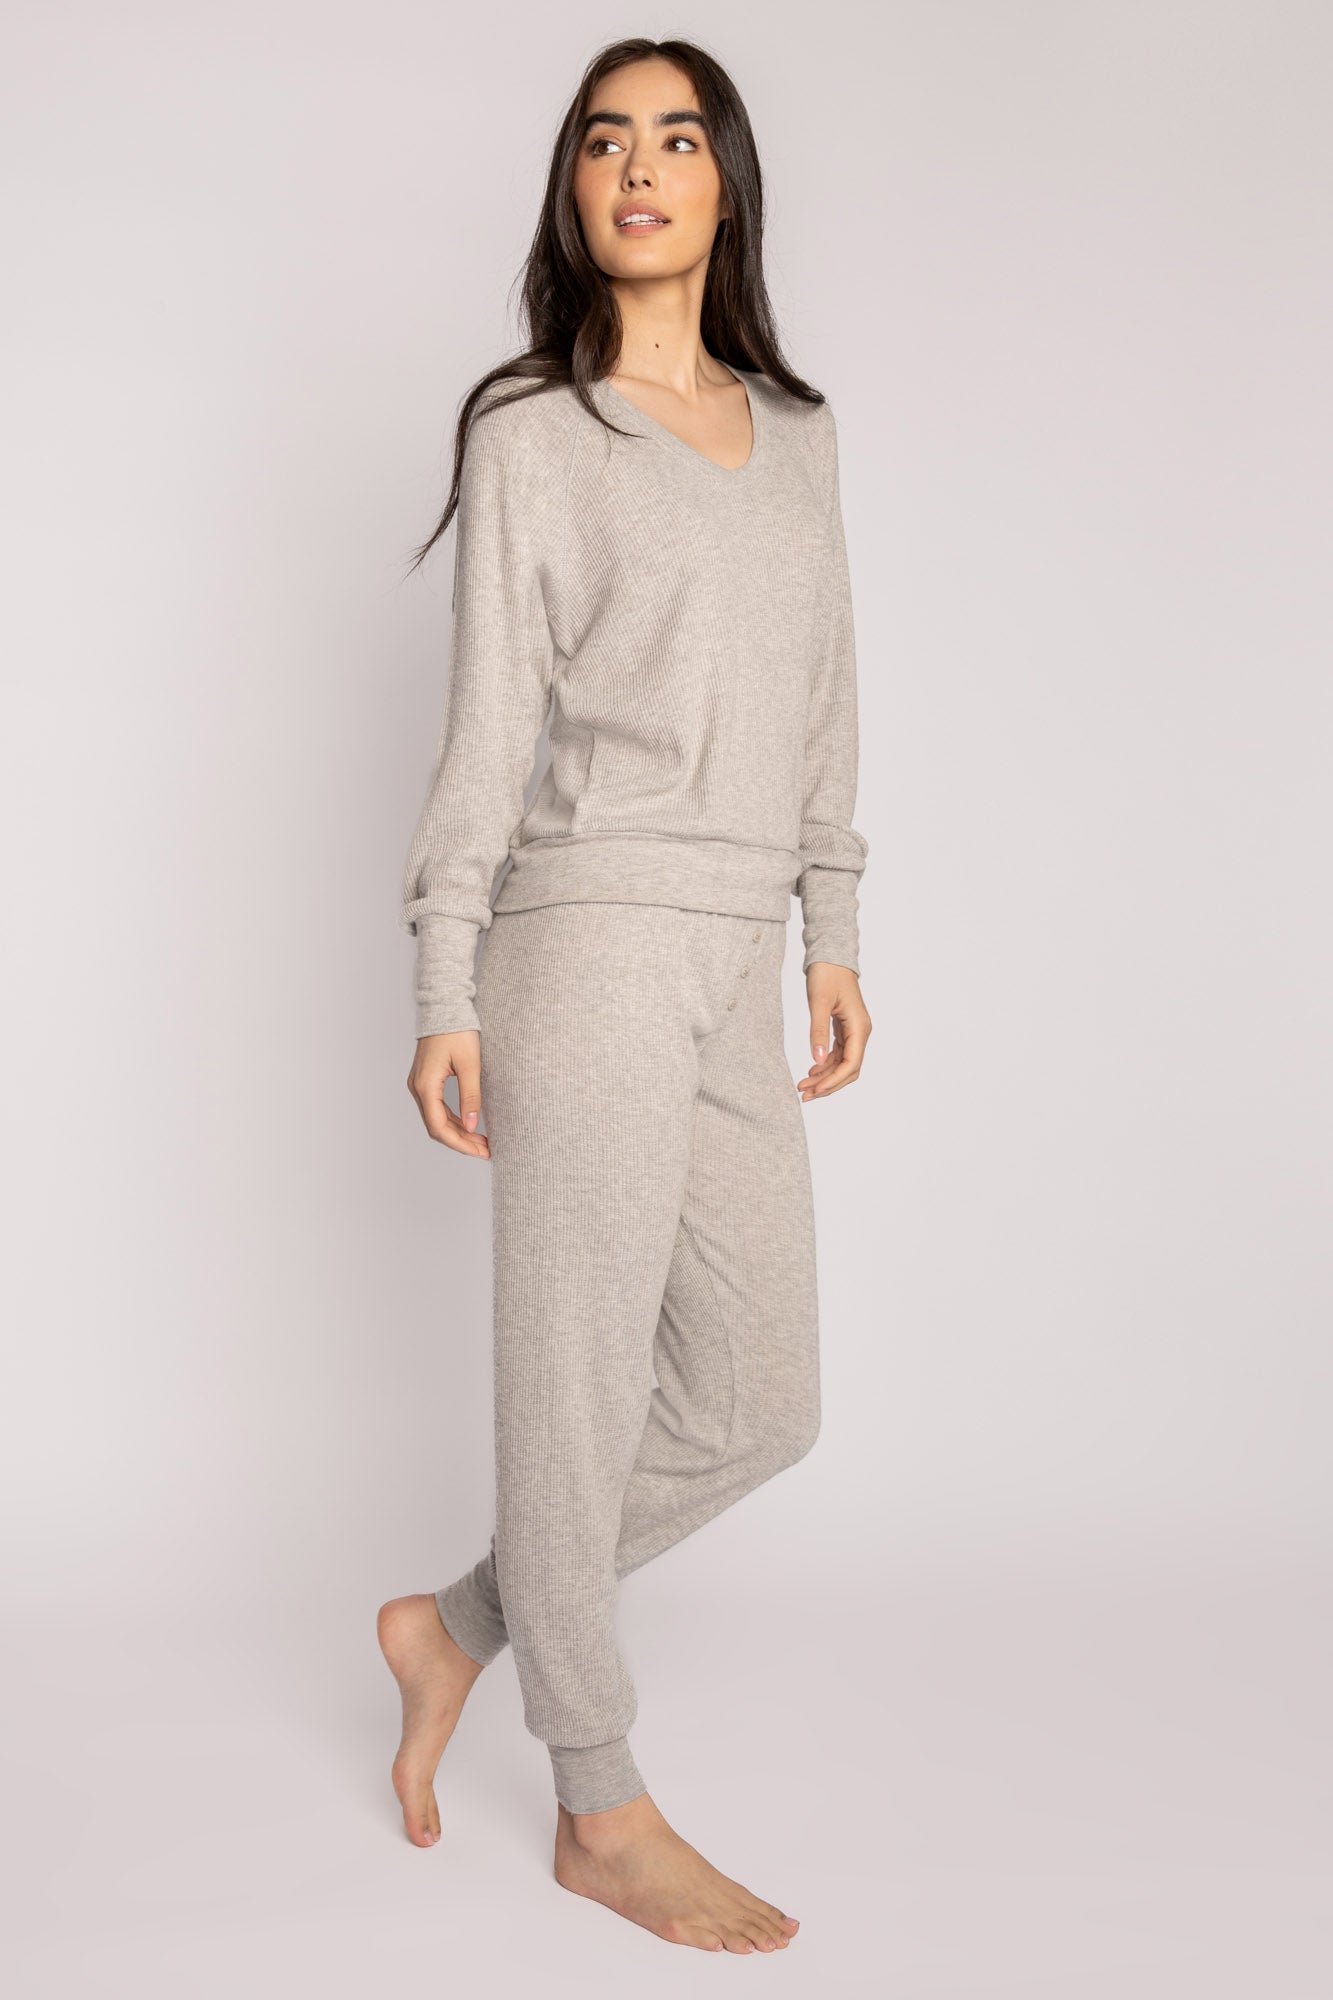 Lounge Wear from PJ Salvage for Women in Gray